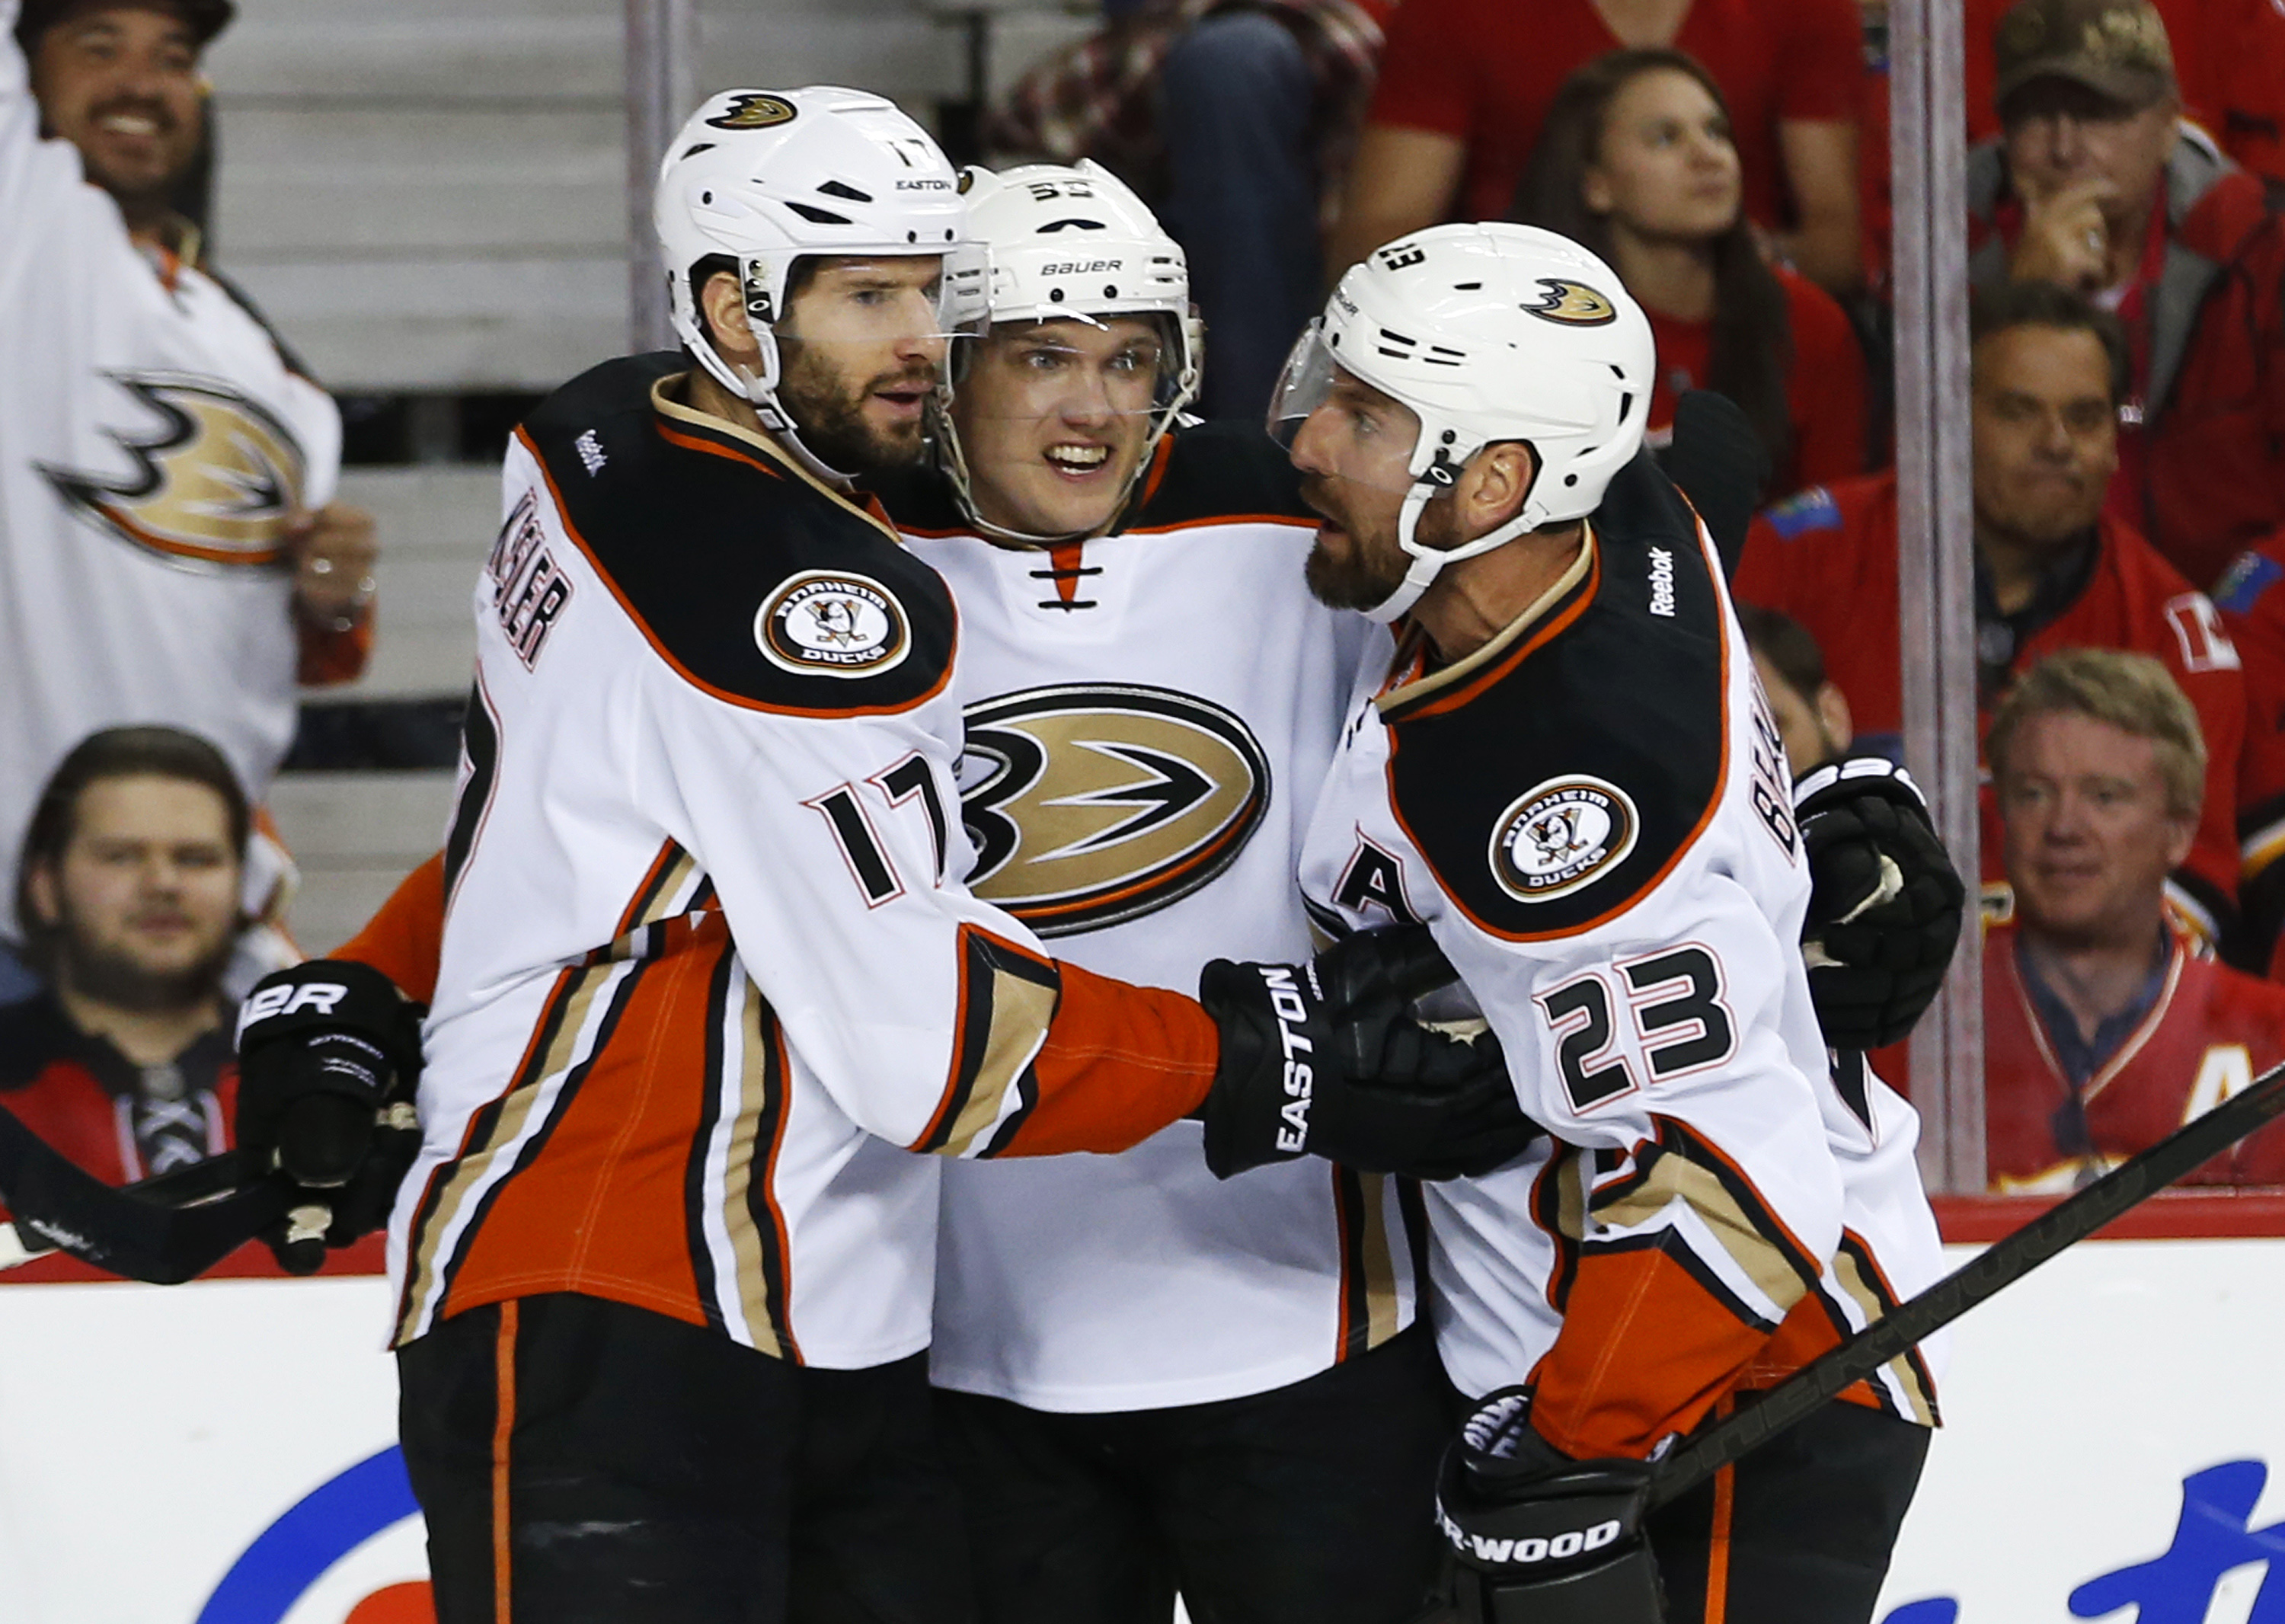 Jakob Silfverberg celebrates with Ryan Kesler and Francois Beauchemin after his first period power play goal.